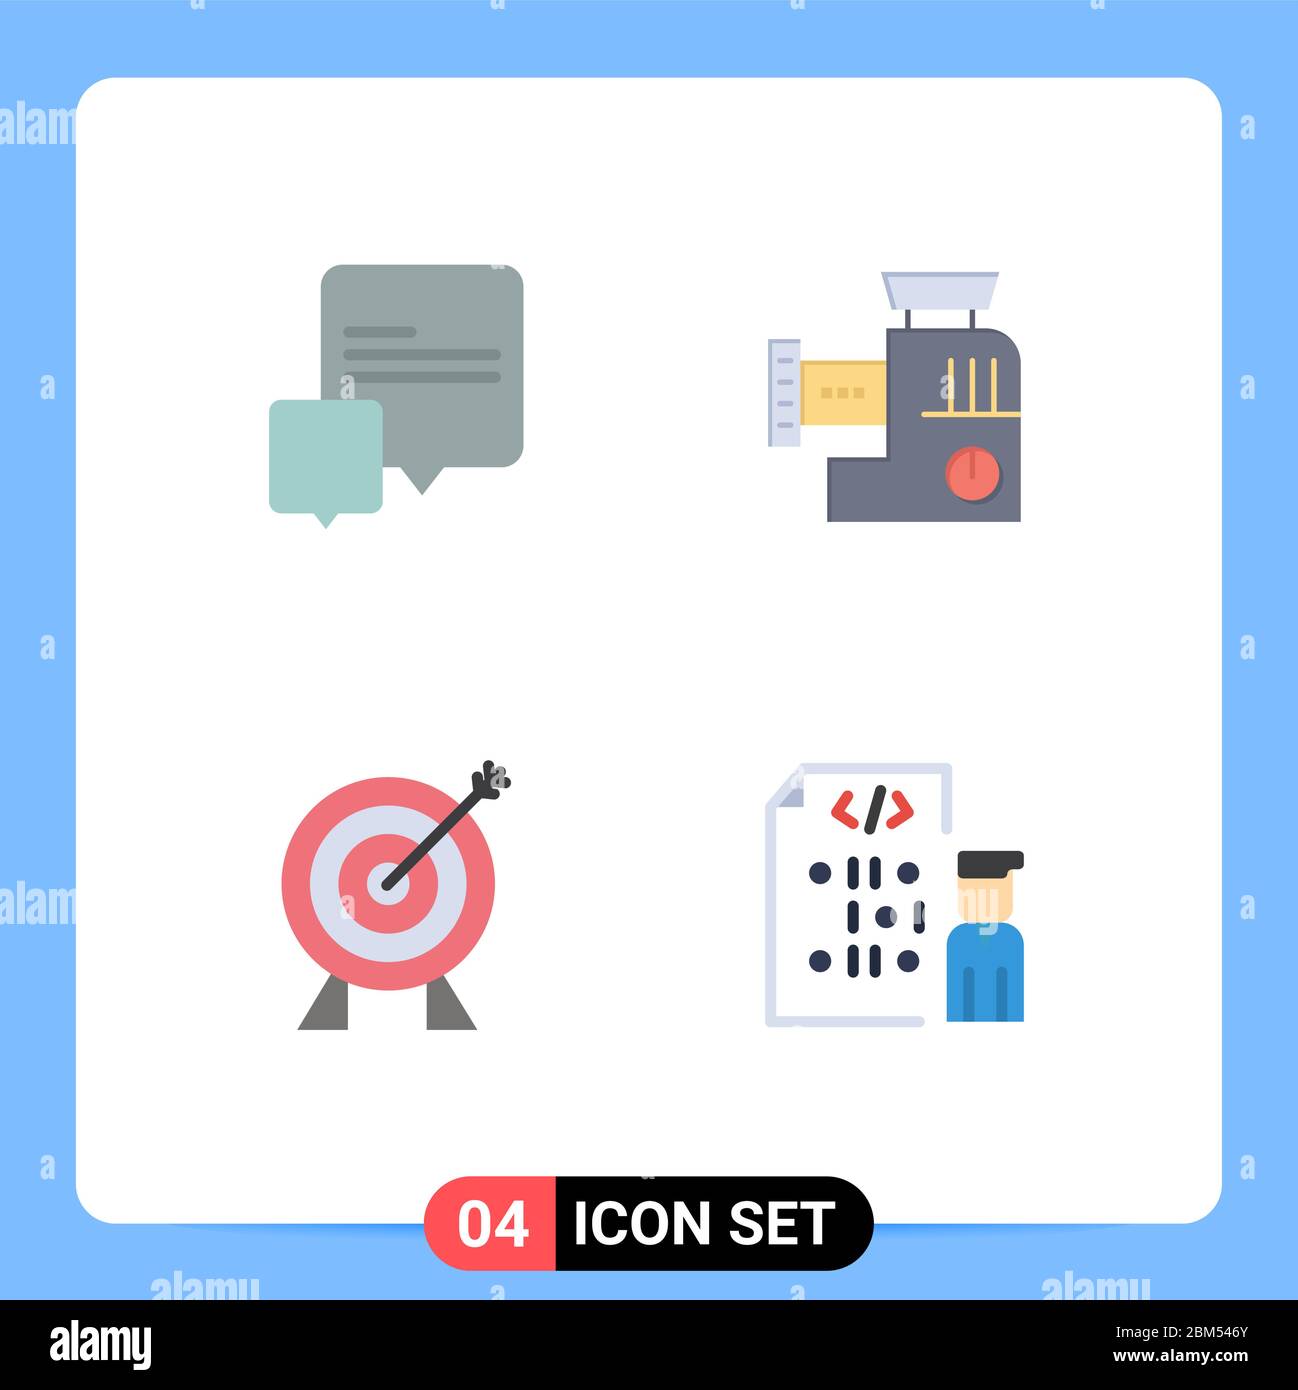 Pictogram Set of 4 Simple Flat Icons of chat, investment, mixer, mix, coding Editable Vector Design Elements Stock Vector